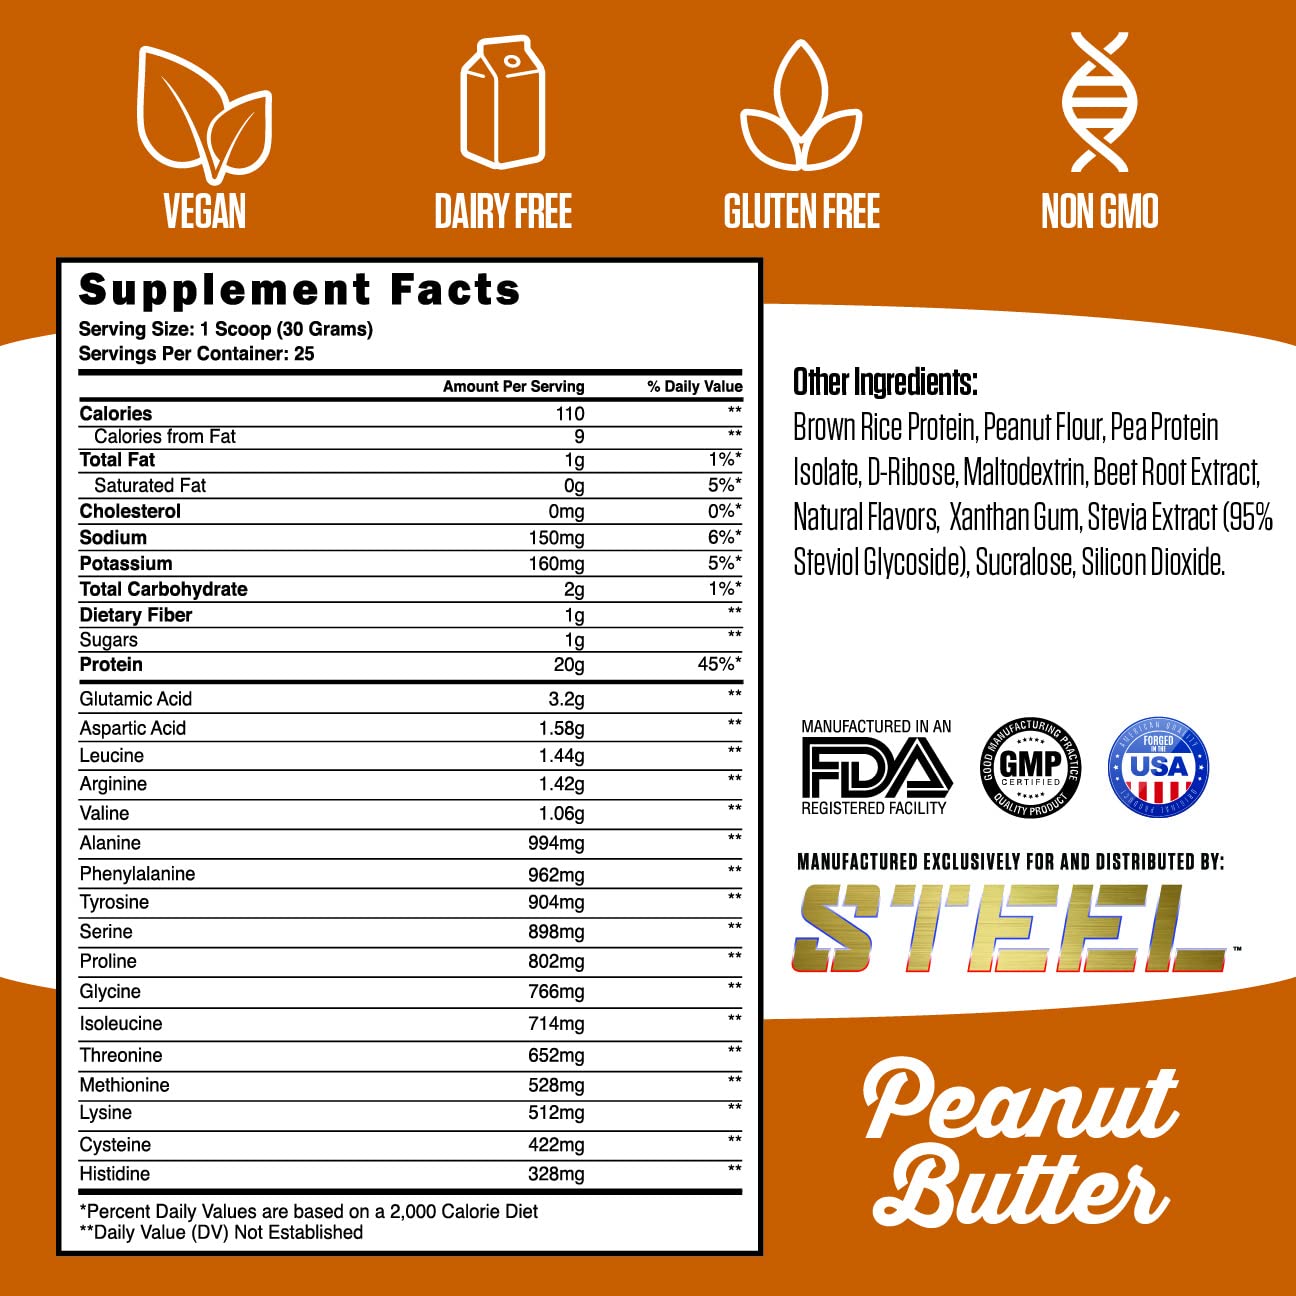 Steel Supplements Veg-PRO | Vegan Protein Powder, Peanut Butter | 25 Servings (1.65lbs) | Organic Protein Powder with BCAA Amino Acid | Gluten Free | Non Dairy | Low Carb Formula | Artficial Flavoring